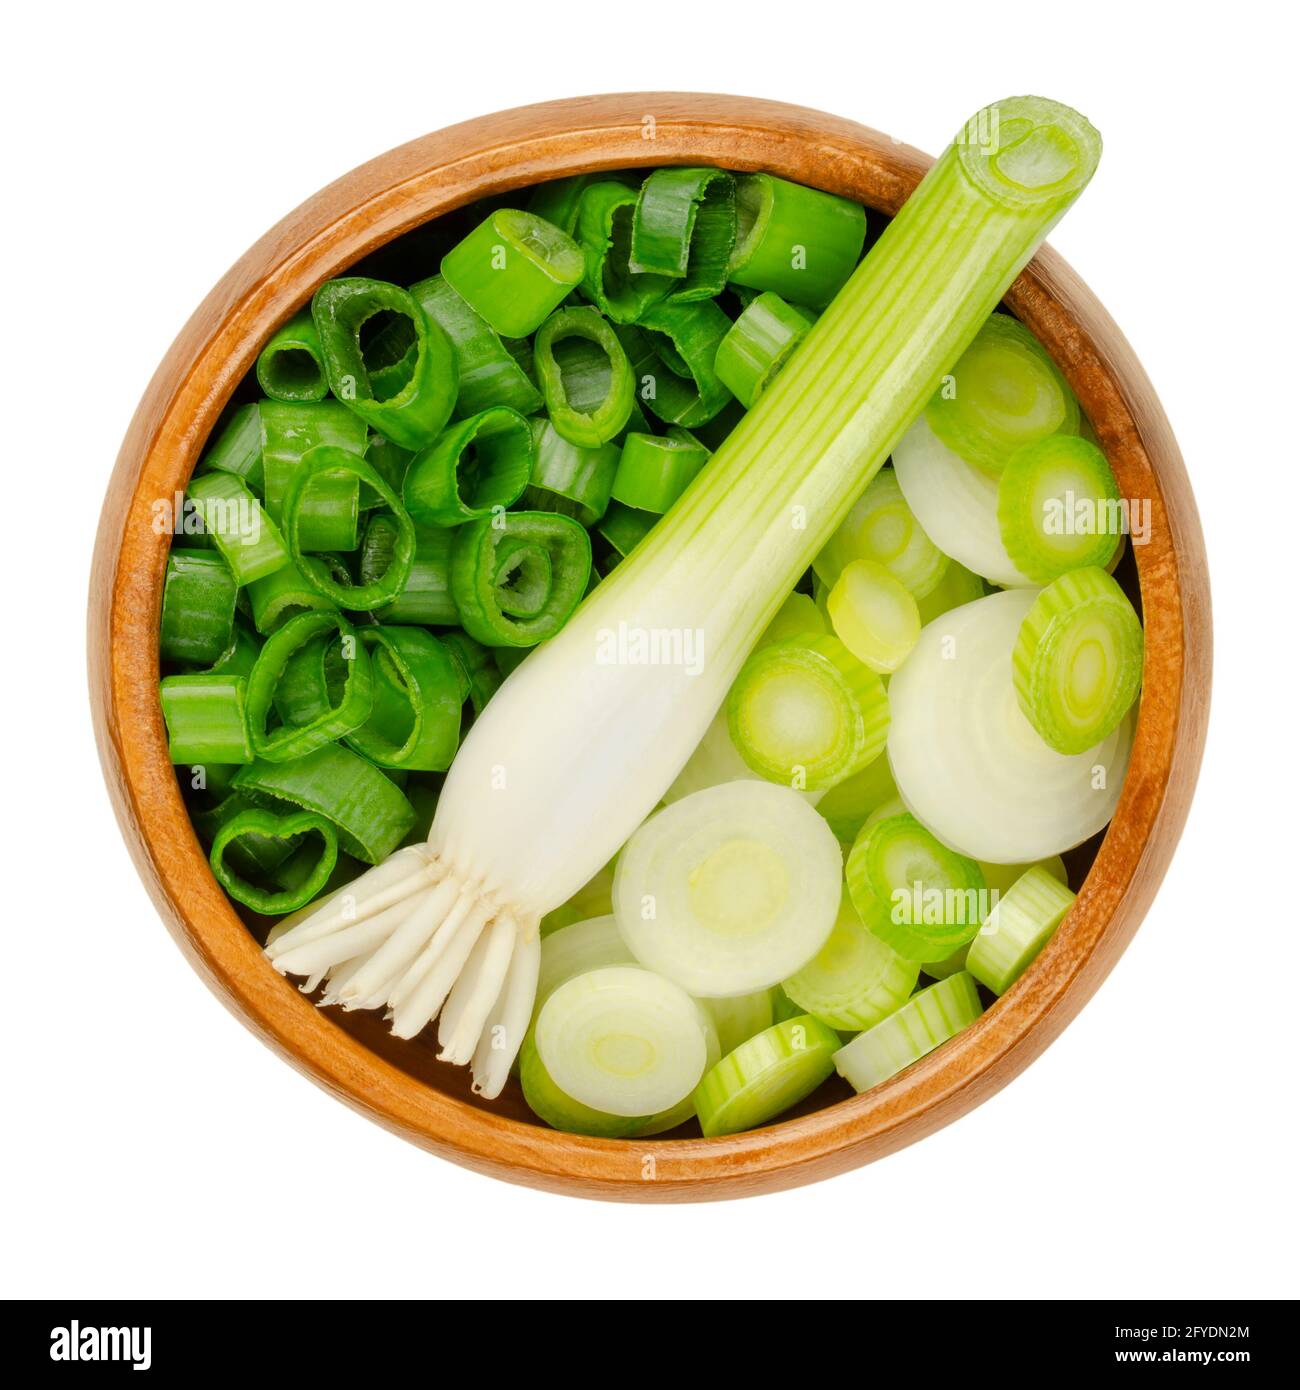 Fresh scallion bulb and sliced scallions, in a wooden bowl. Green onions, also called spring onions or sibies. Vegetable with mild onion taste. Stock Photo